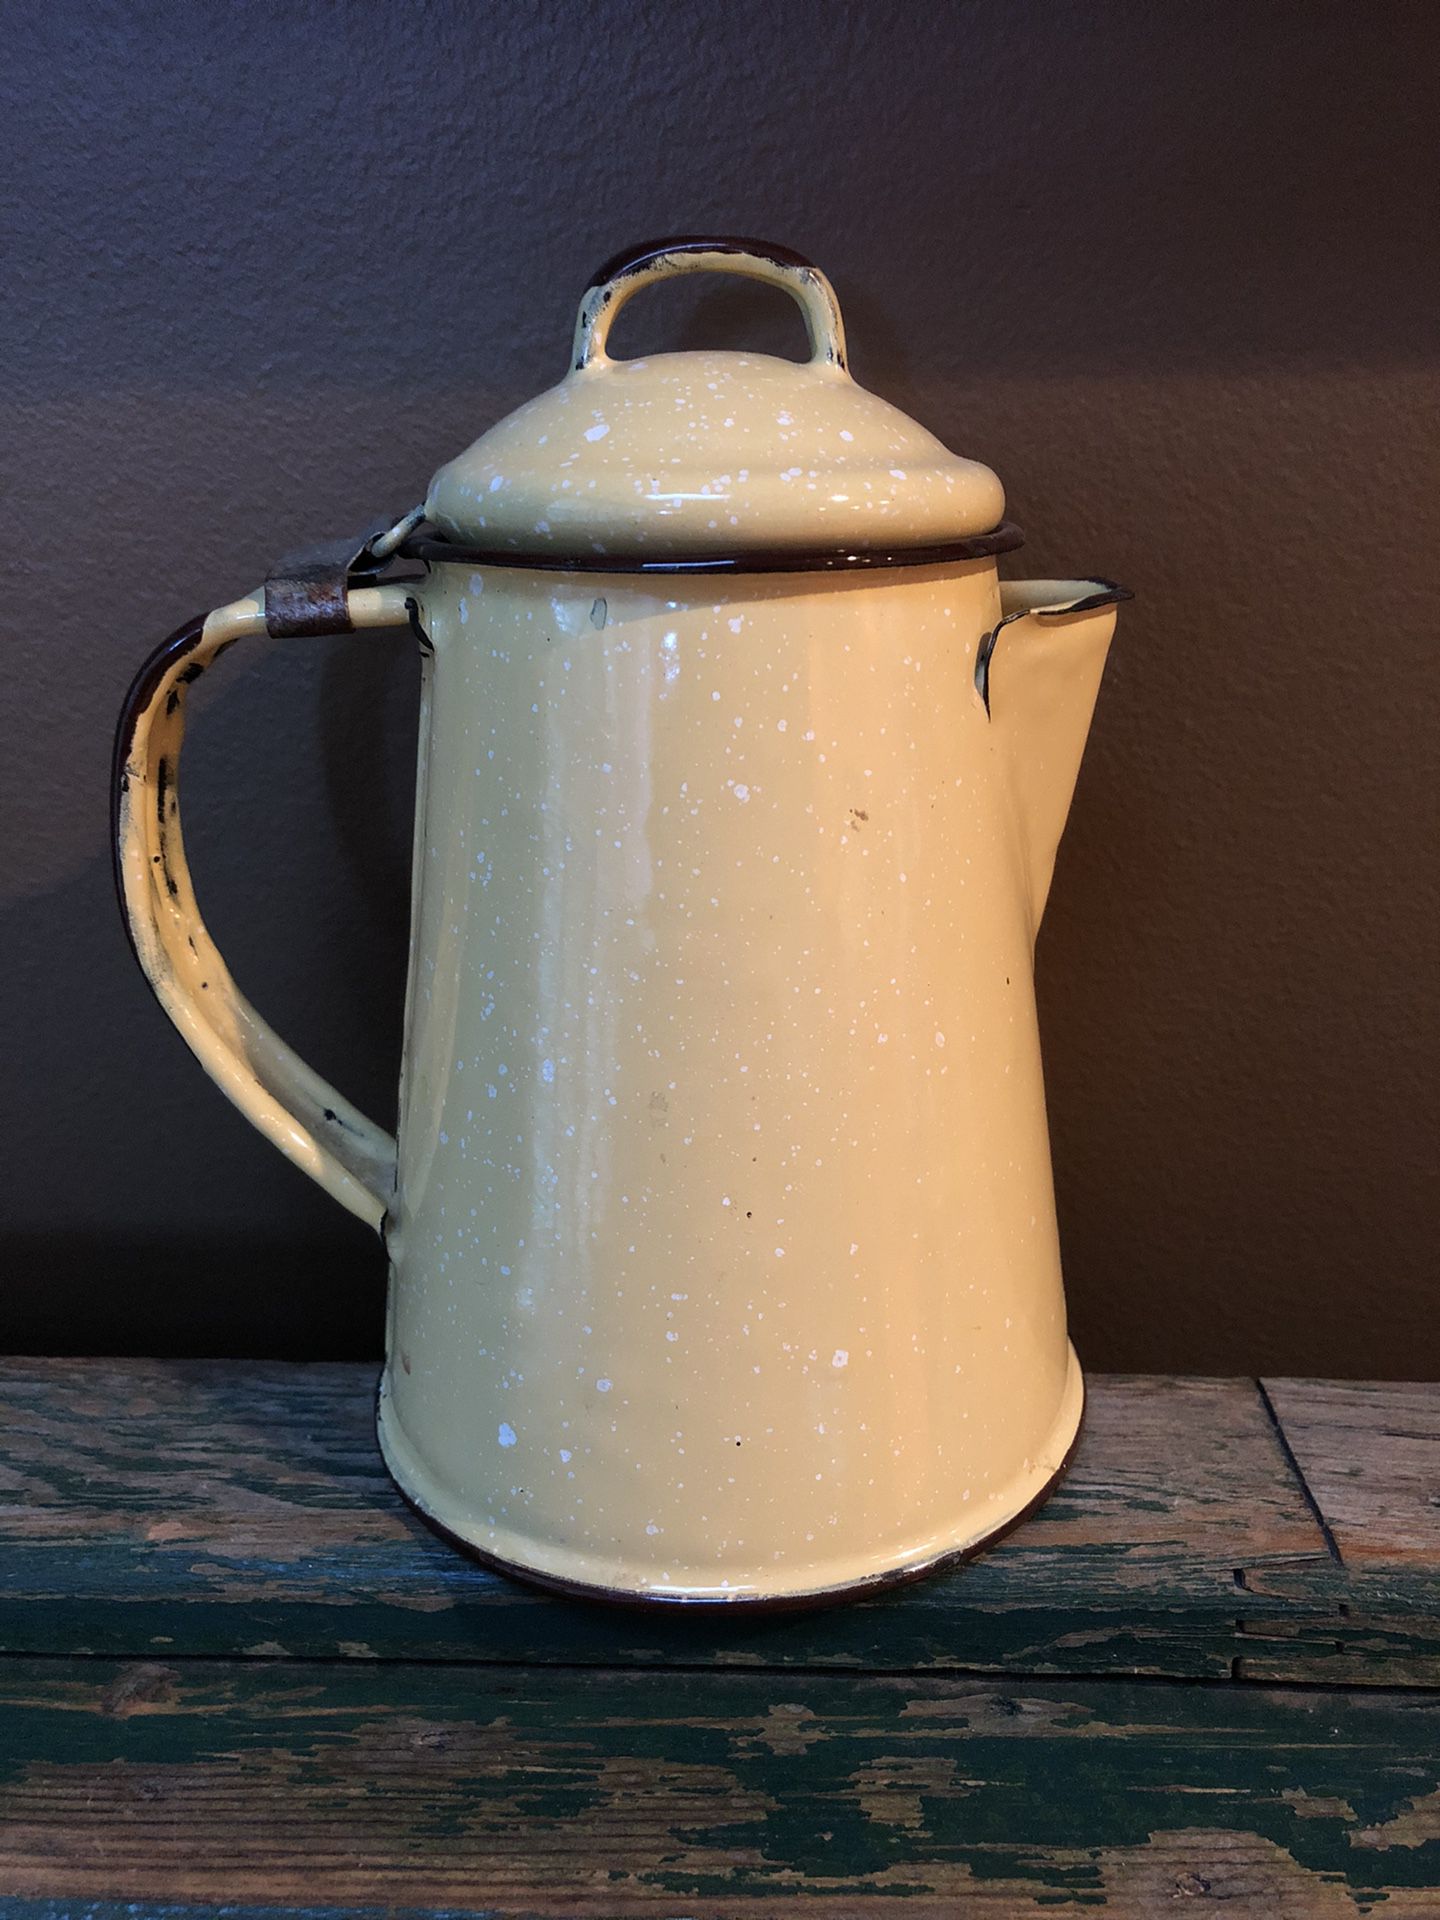 Vintage Small Yellow Enamel Covered Metal Camping Coffee Pot with Attached Lid. Holds about 20 ounces.